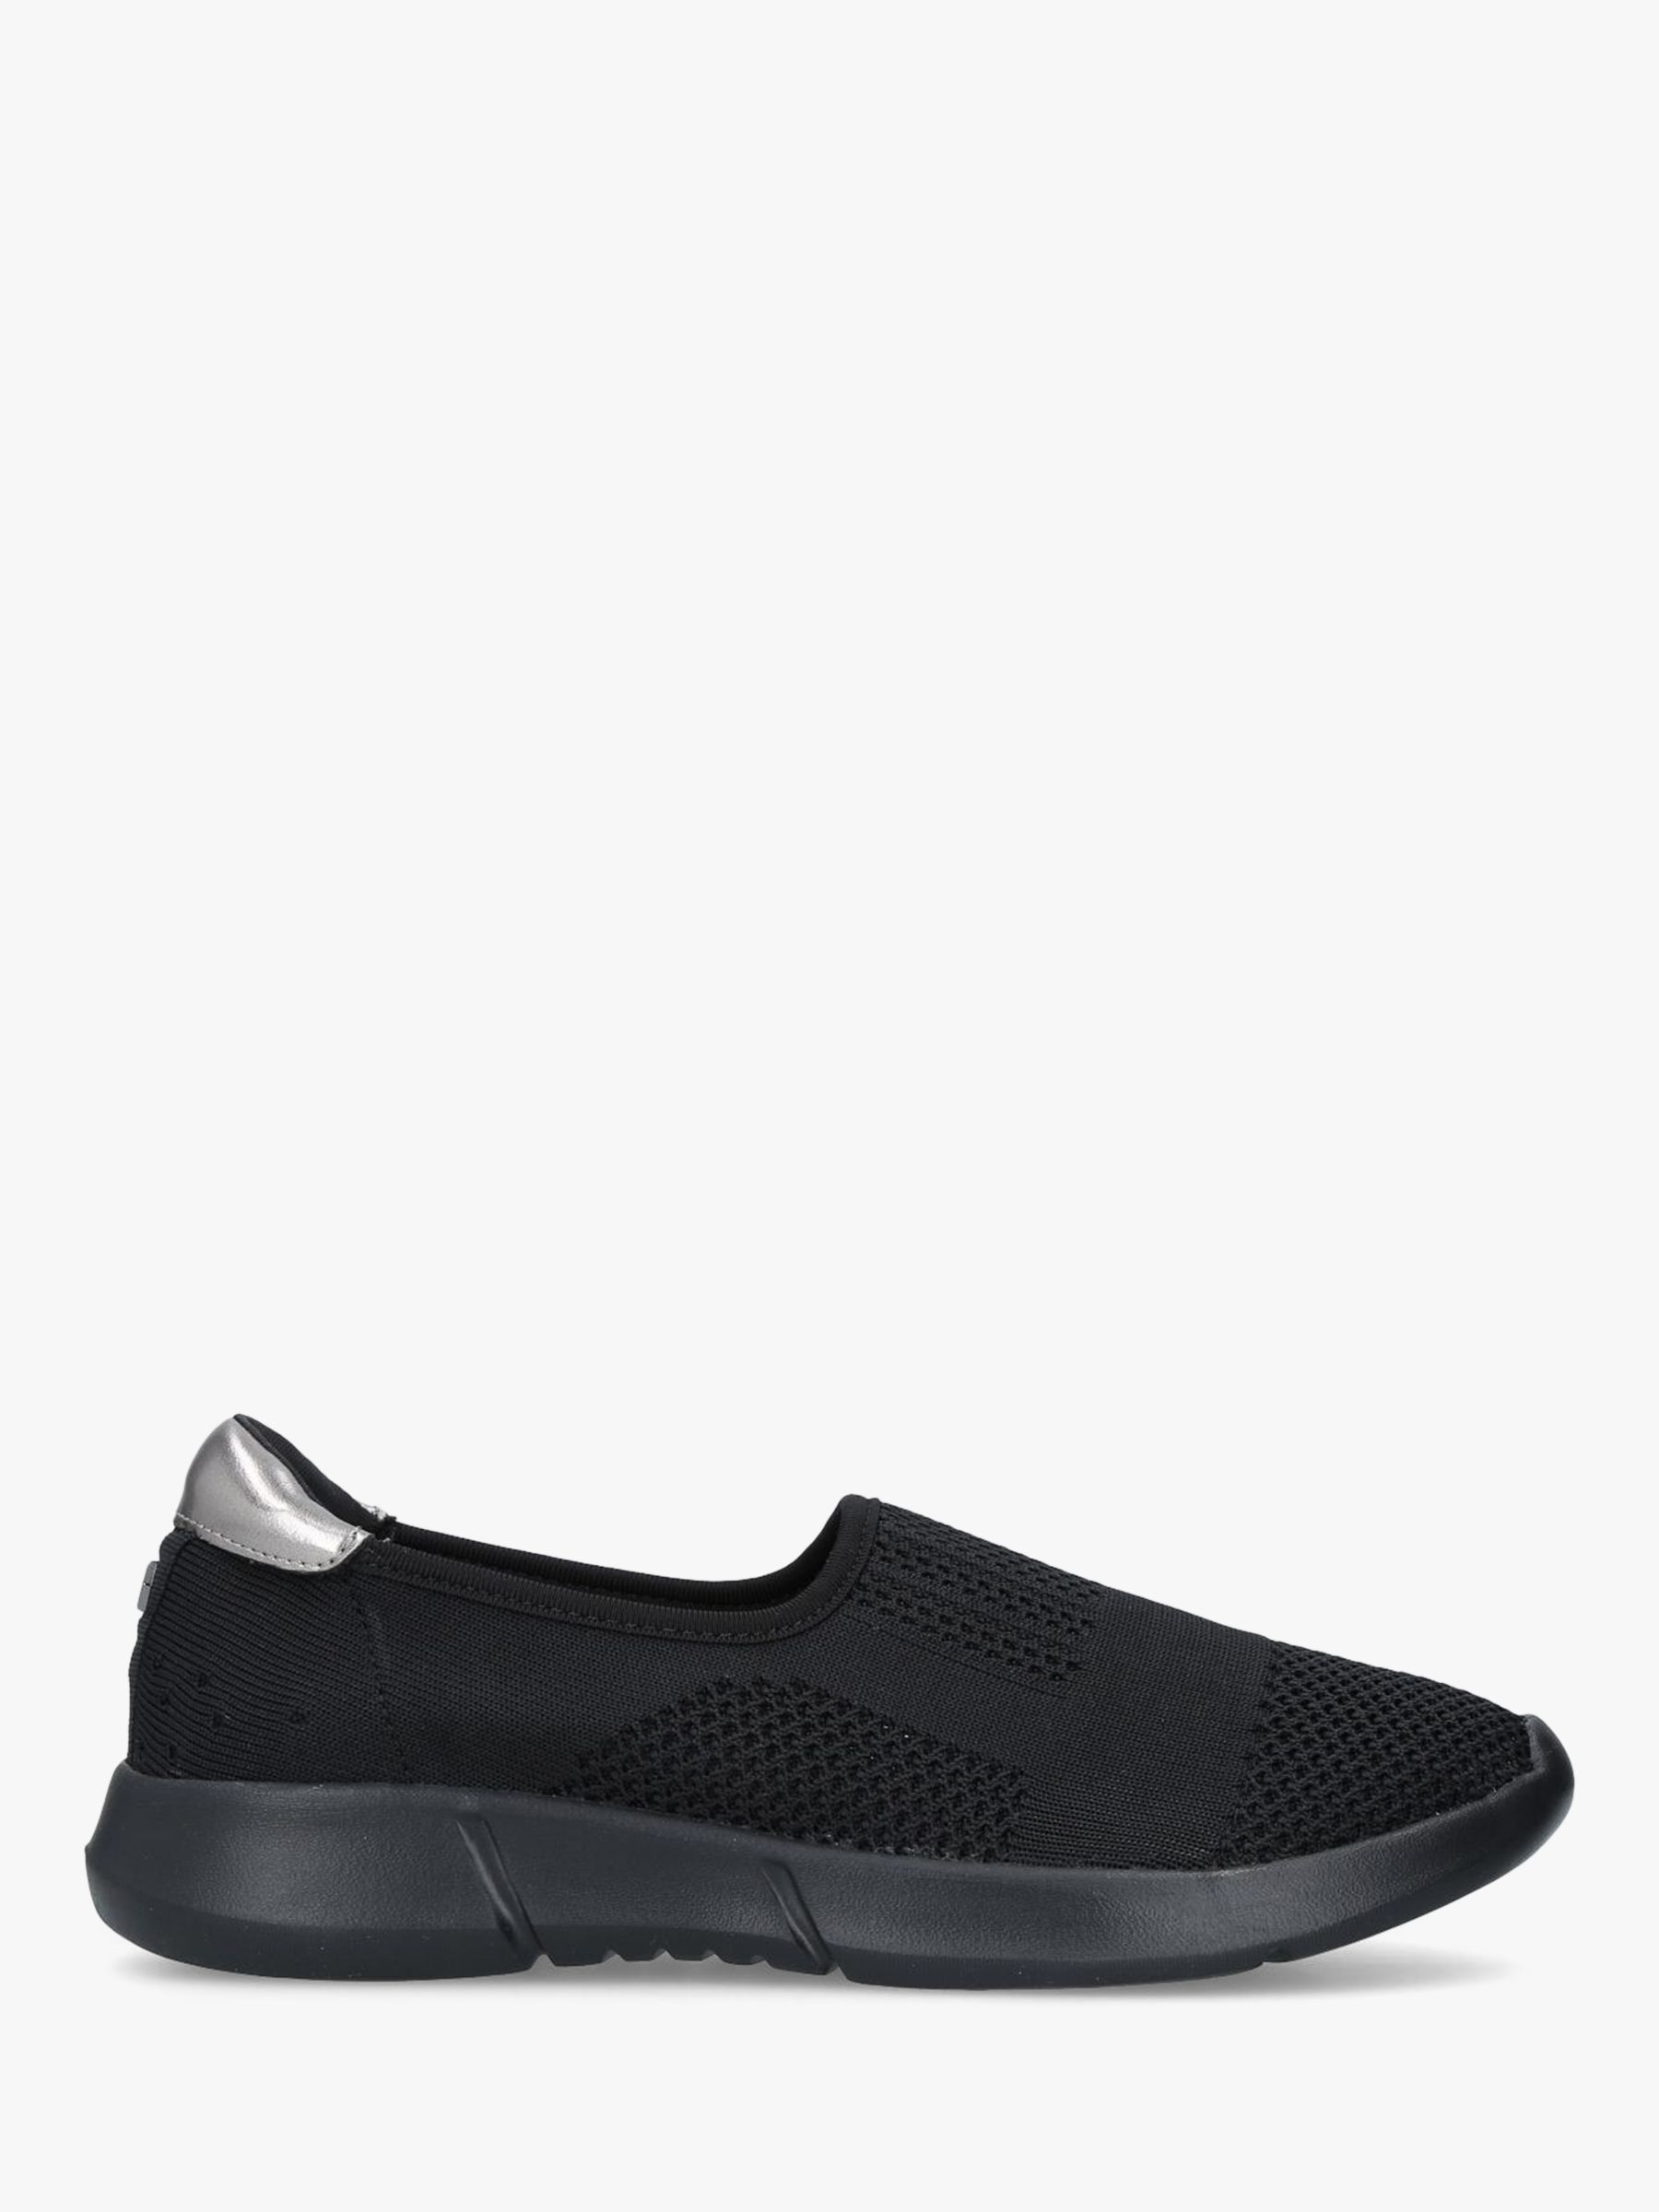 Carvela Carly 2 Slip On Trainers at 